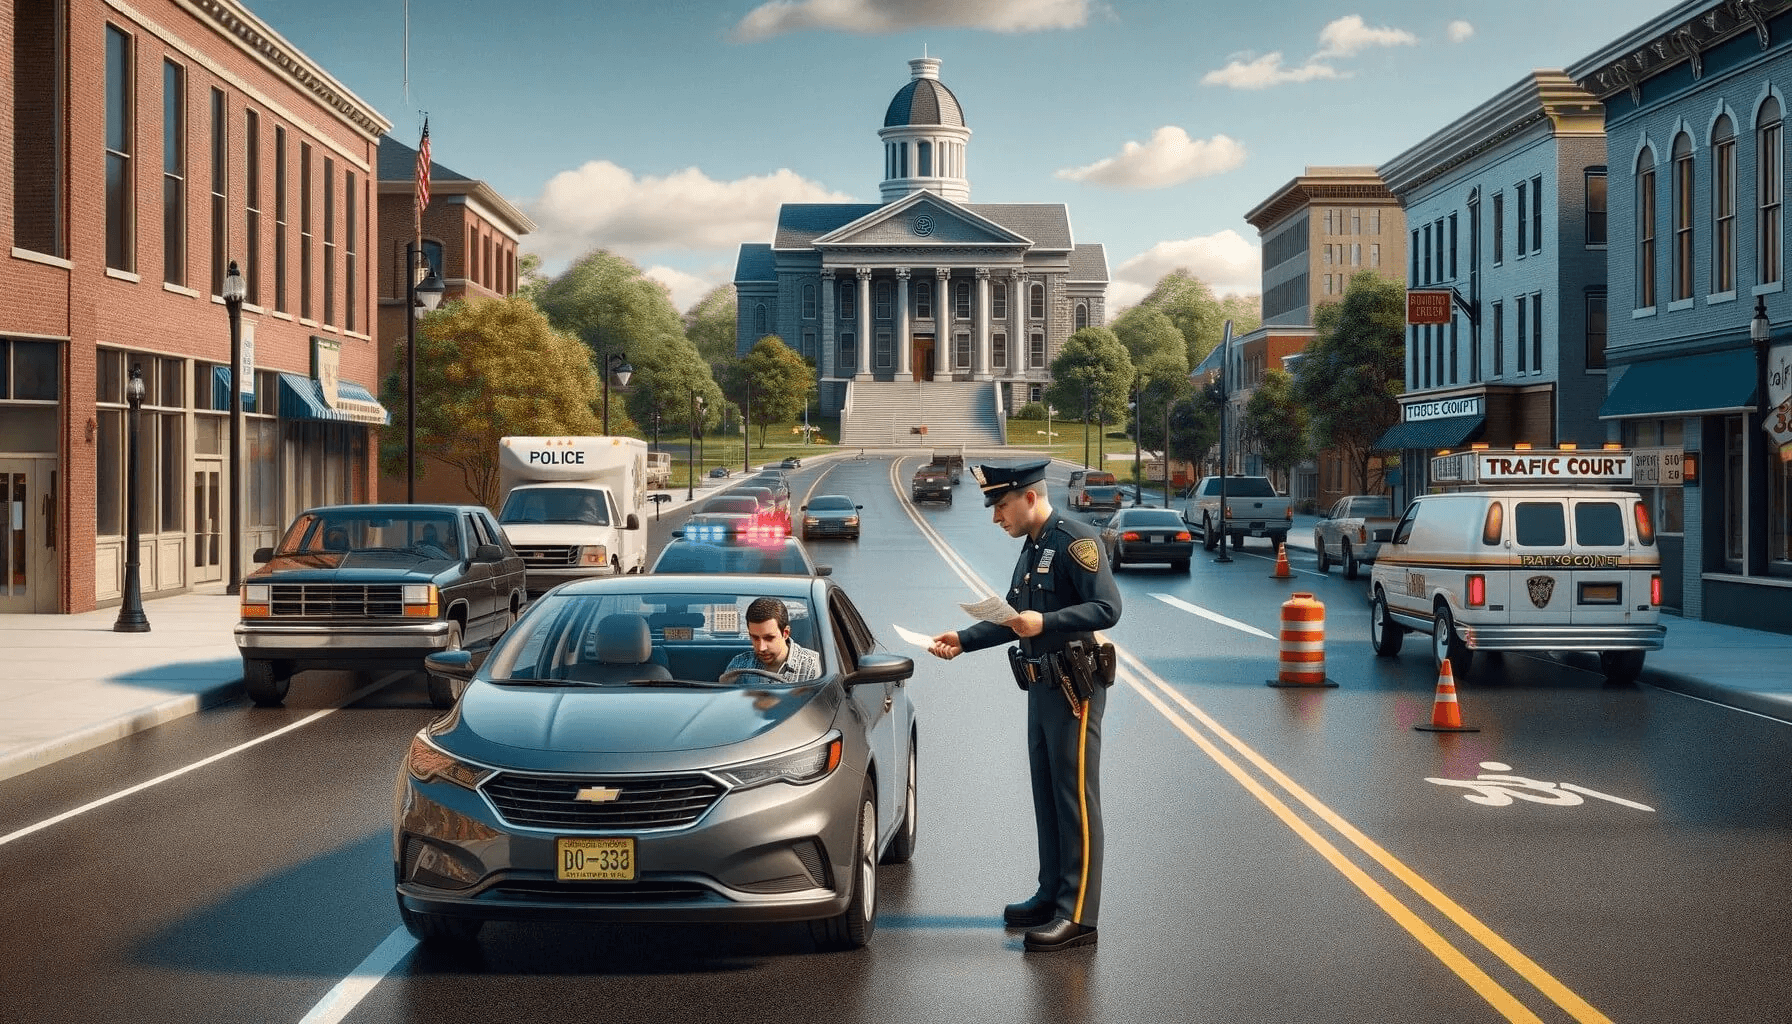 Police officer issuing a traffic ticket to Cumberland County, NJ driver